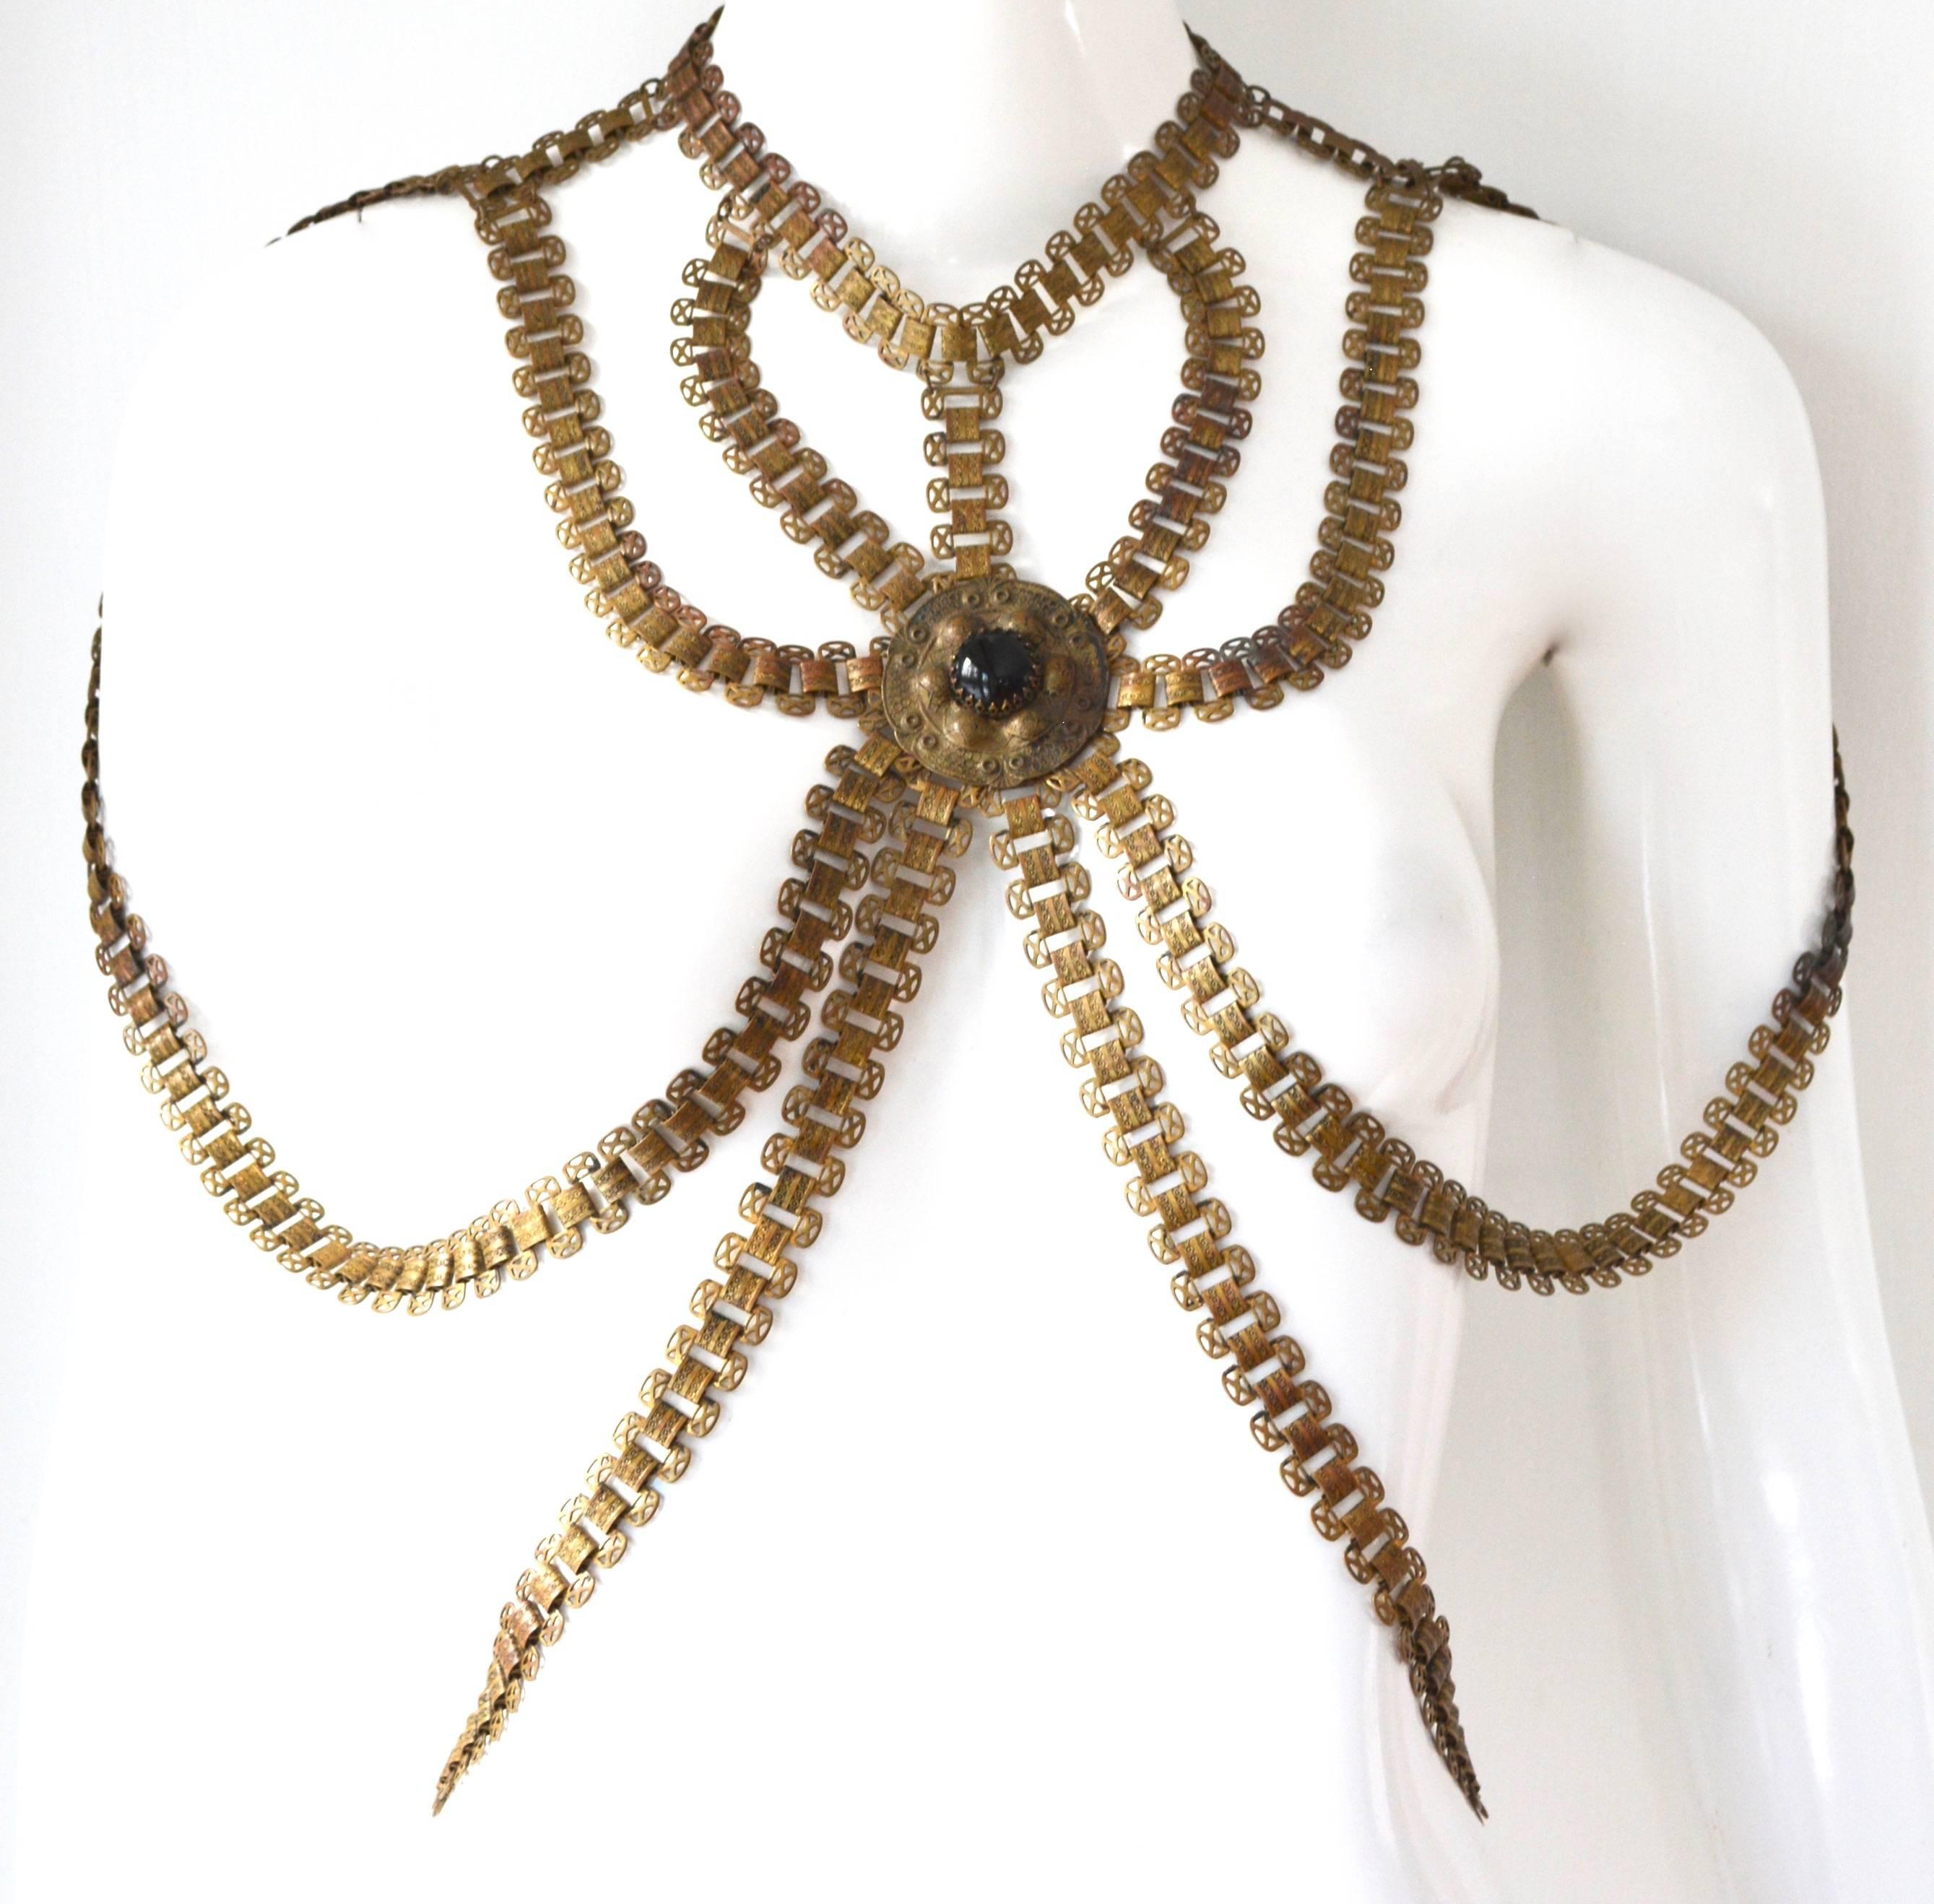 1920s Body Jewelry Chain Necklace / Halter 1